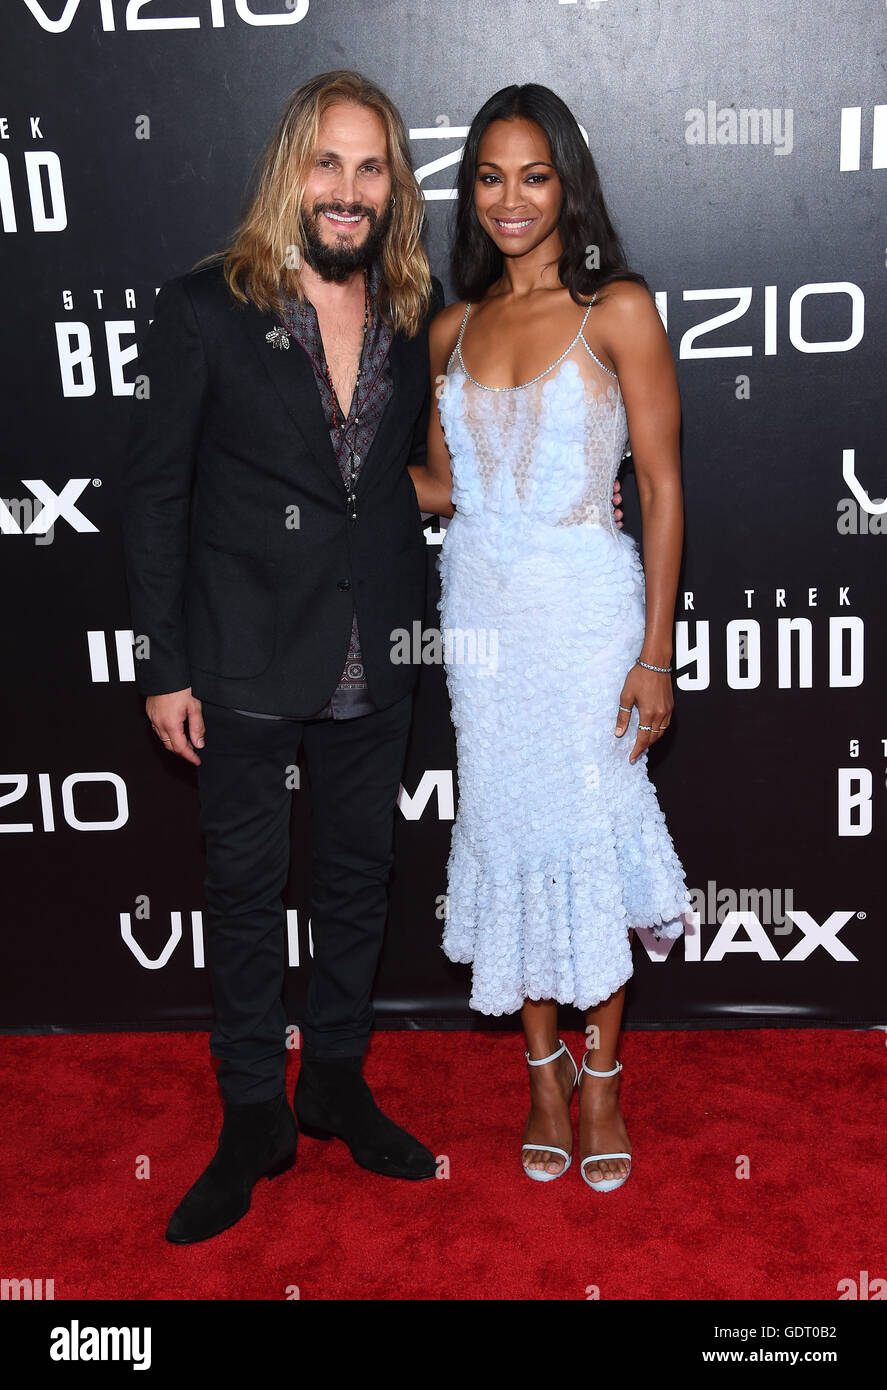 San Diego, California, USA. 20th July, 2016. Zoe Saldana & Marco Perego arrives for the premiere of the film 'Star Trek Beyond' at the Embarcadero Marina Park. Credit:  Lisa O'Connor/ZUMA Wire/Alamy Live News Stock Photo